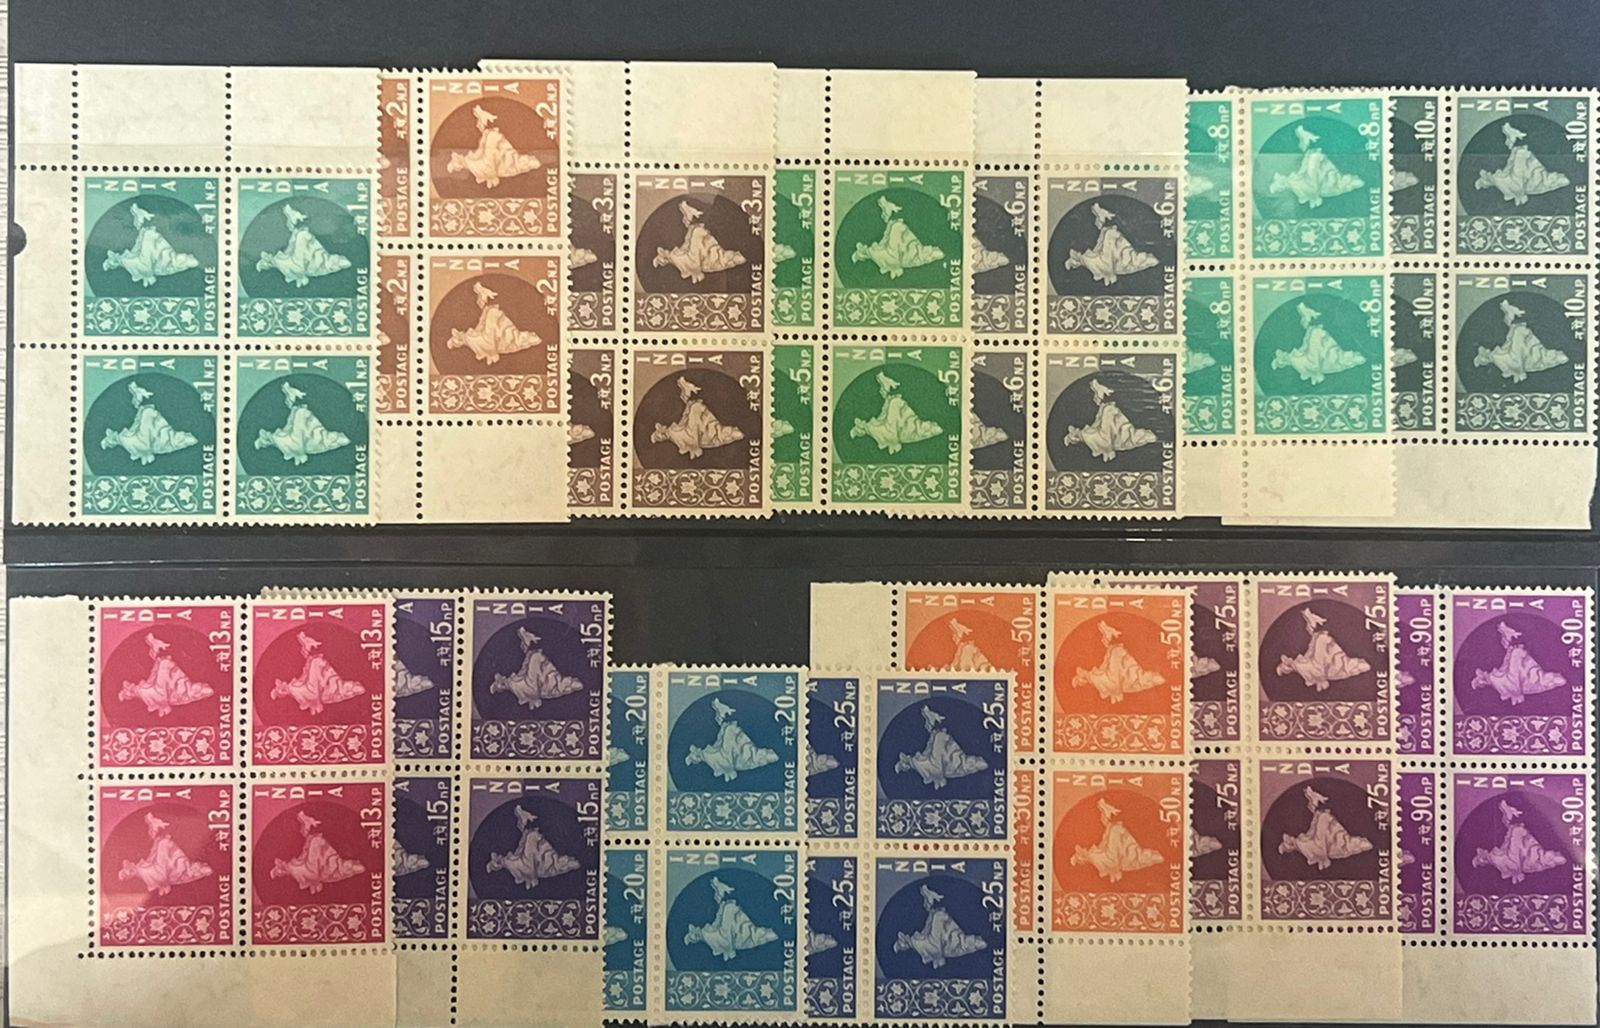 India 1957 3rd Definitives Series Maps Star Watermark Complete Set in Blocks of 4 MNH